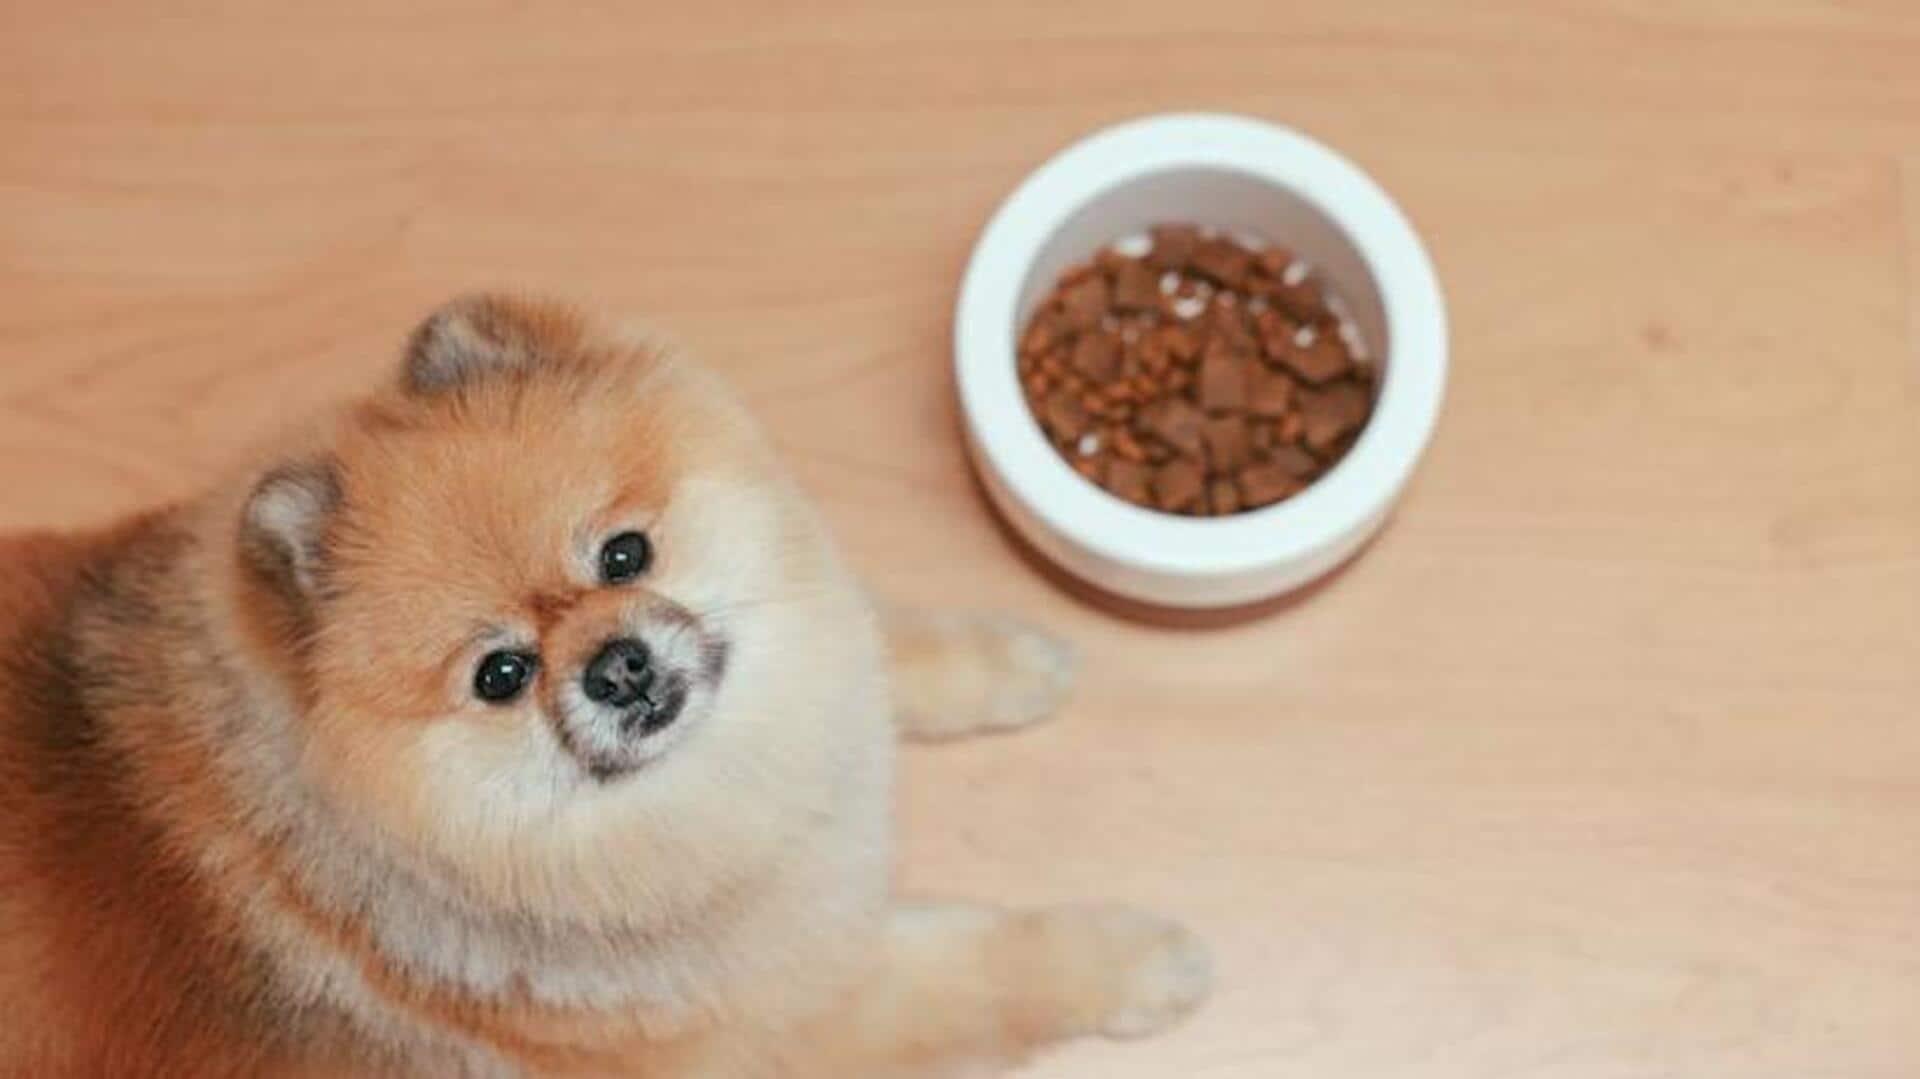 Take note of these Pomeranian tear stain solutions